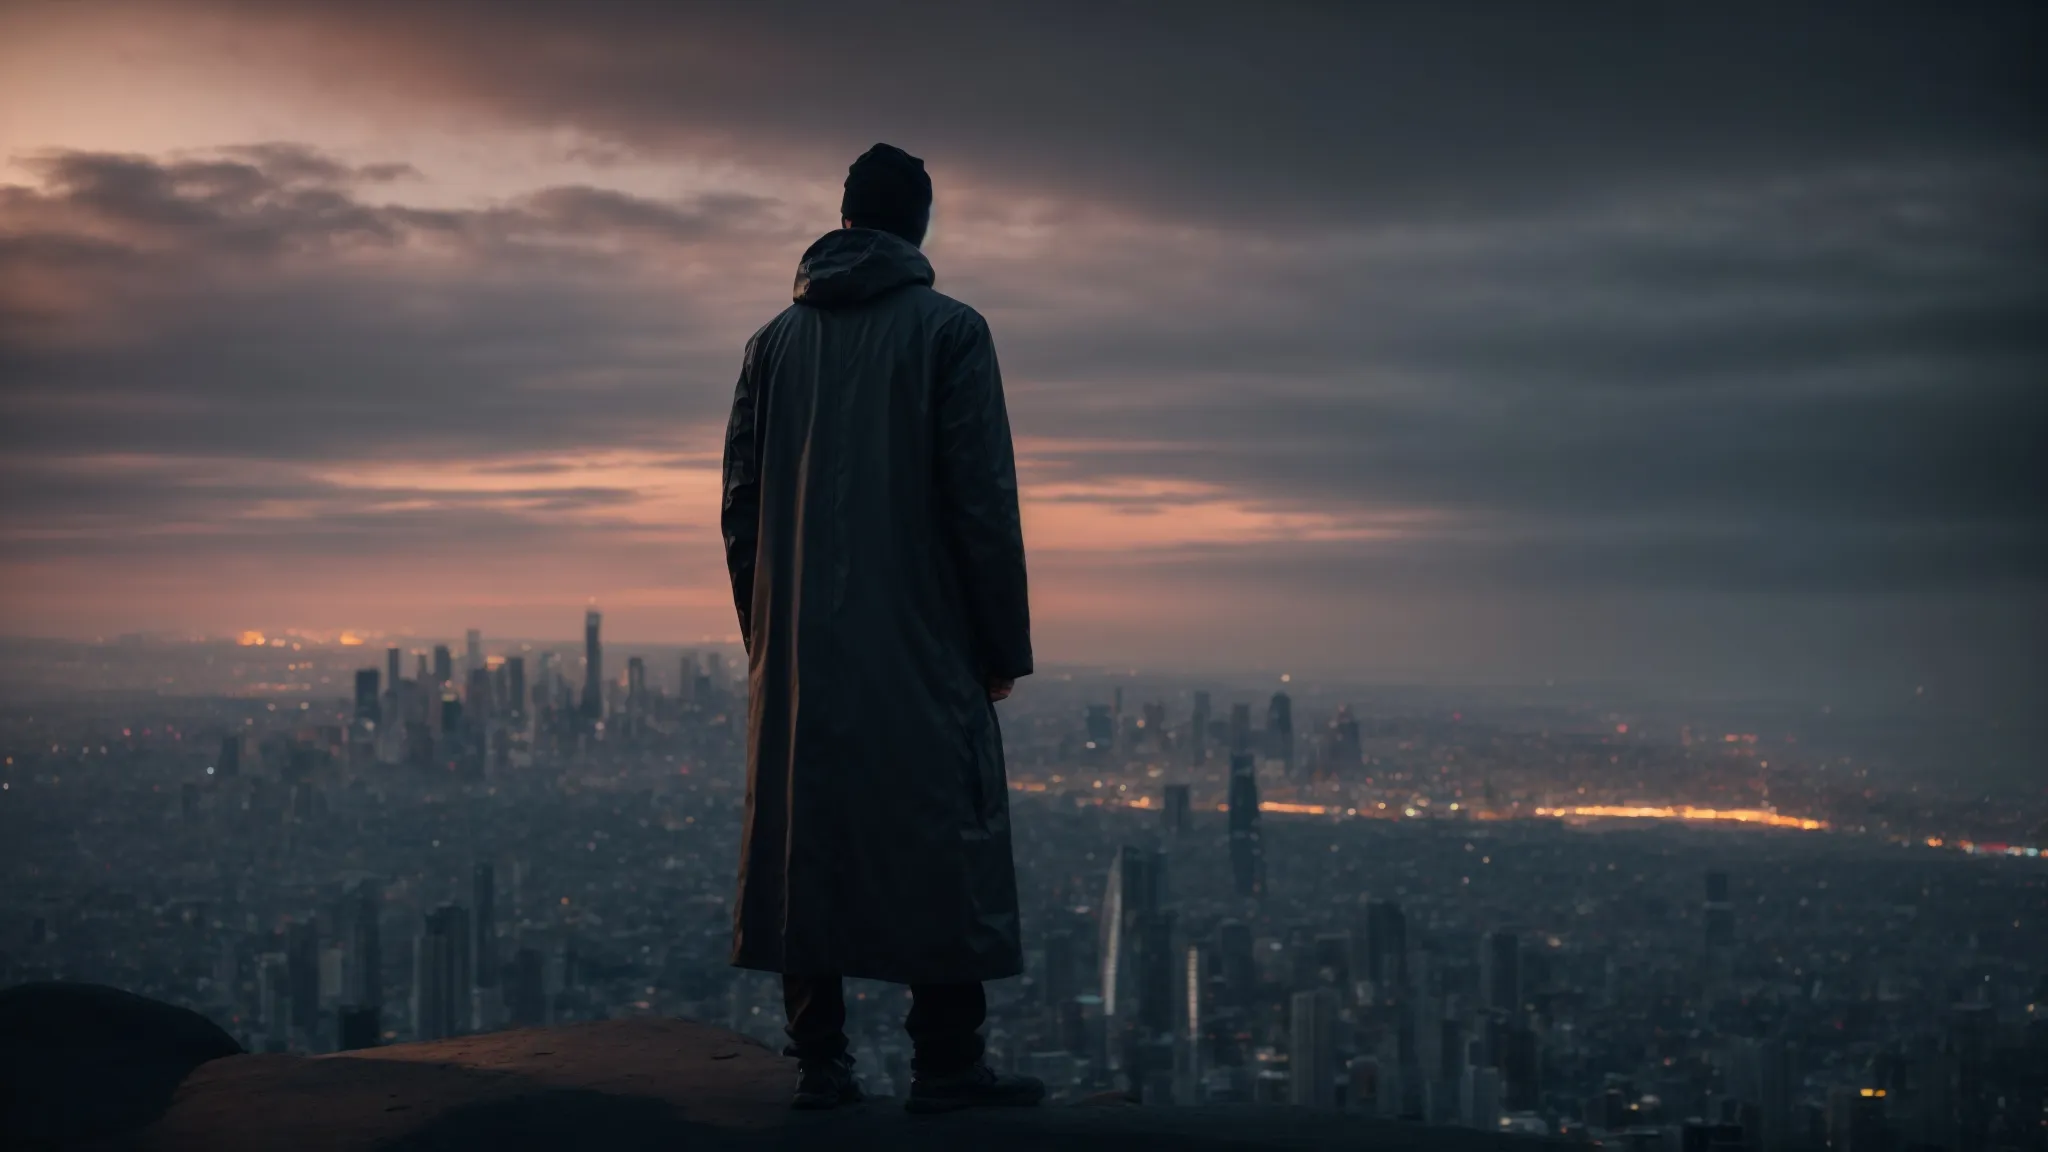 a lone figure stands looking out over a futuristic cityscape at dusk, symbolizing contemplation and vision for progress.